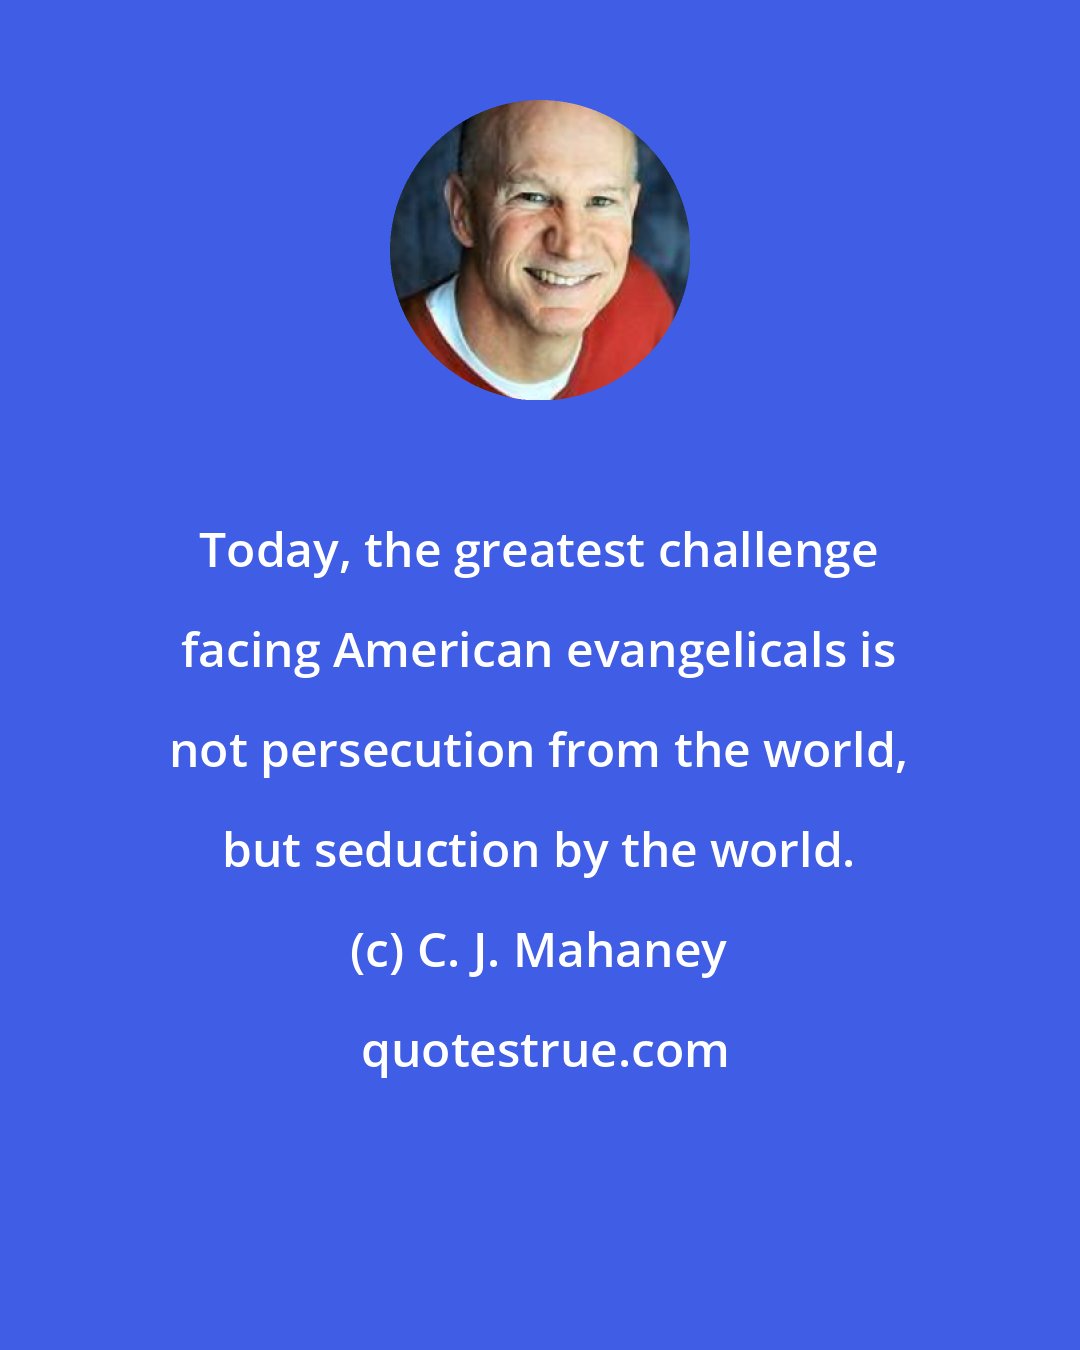 C. J. Mahaney: Today, the greatest challenge facing American evangelicals is not persecution from the world, but seduction by the world.